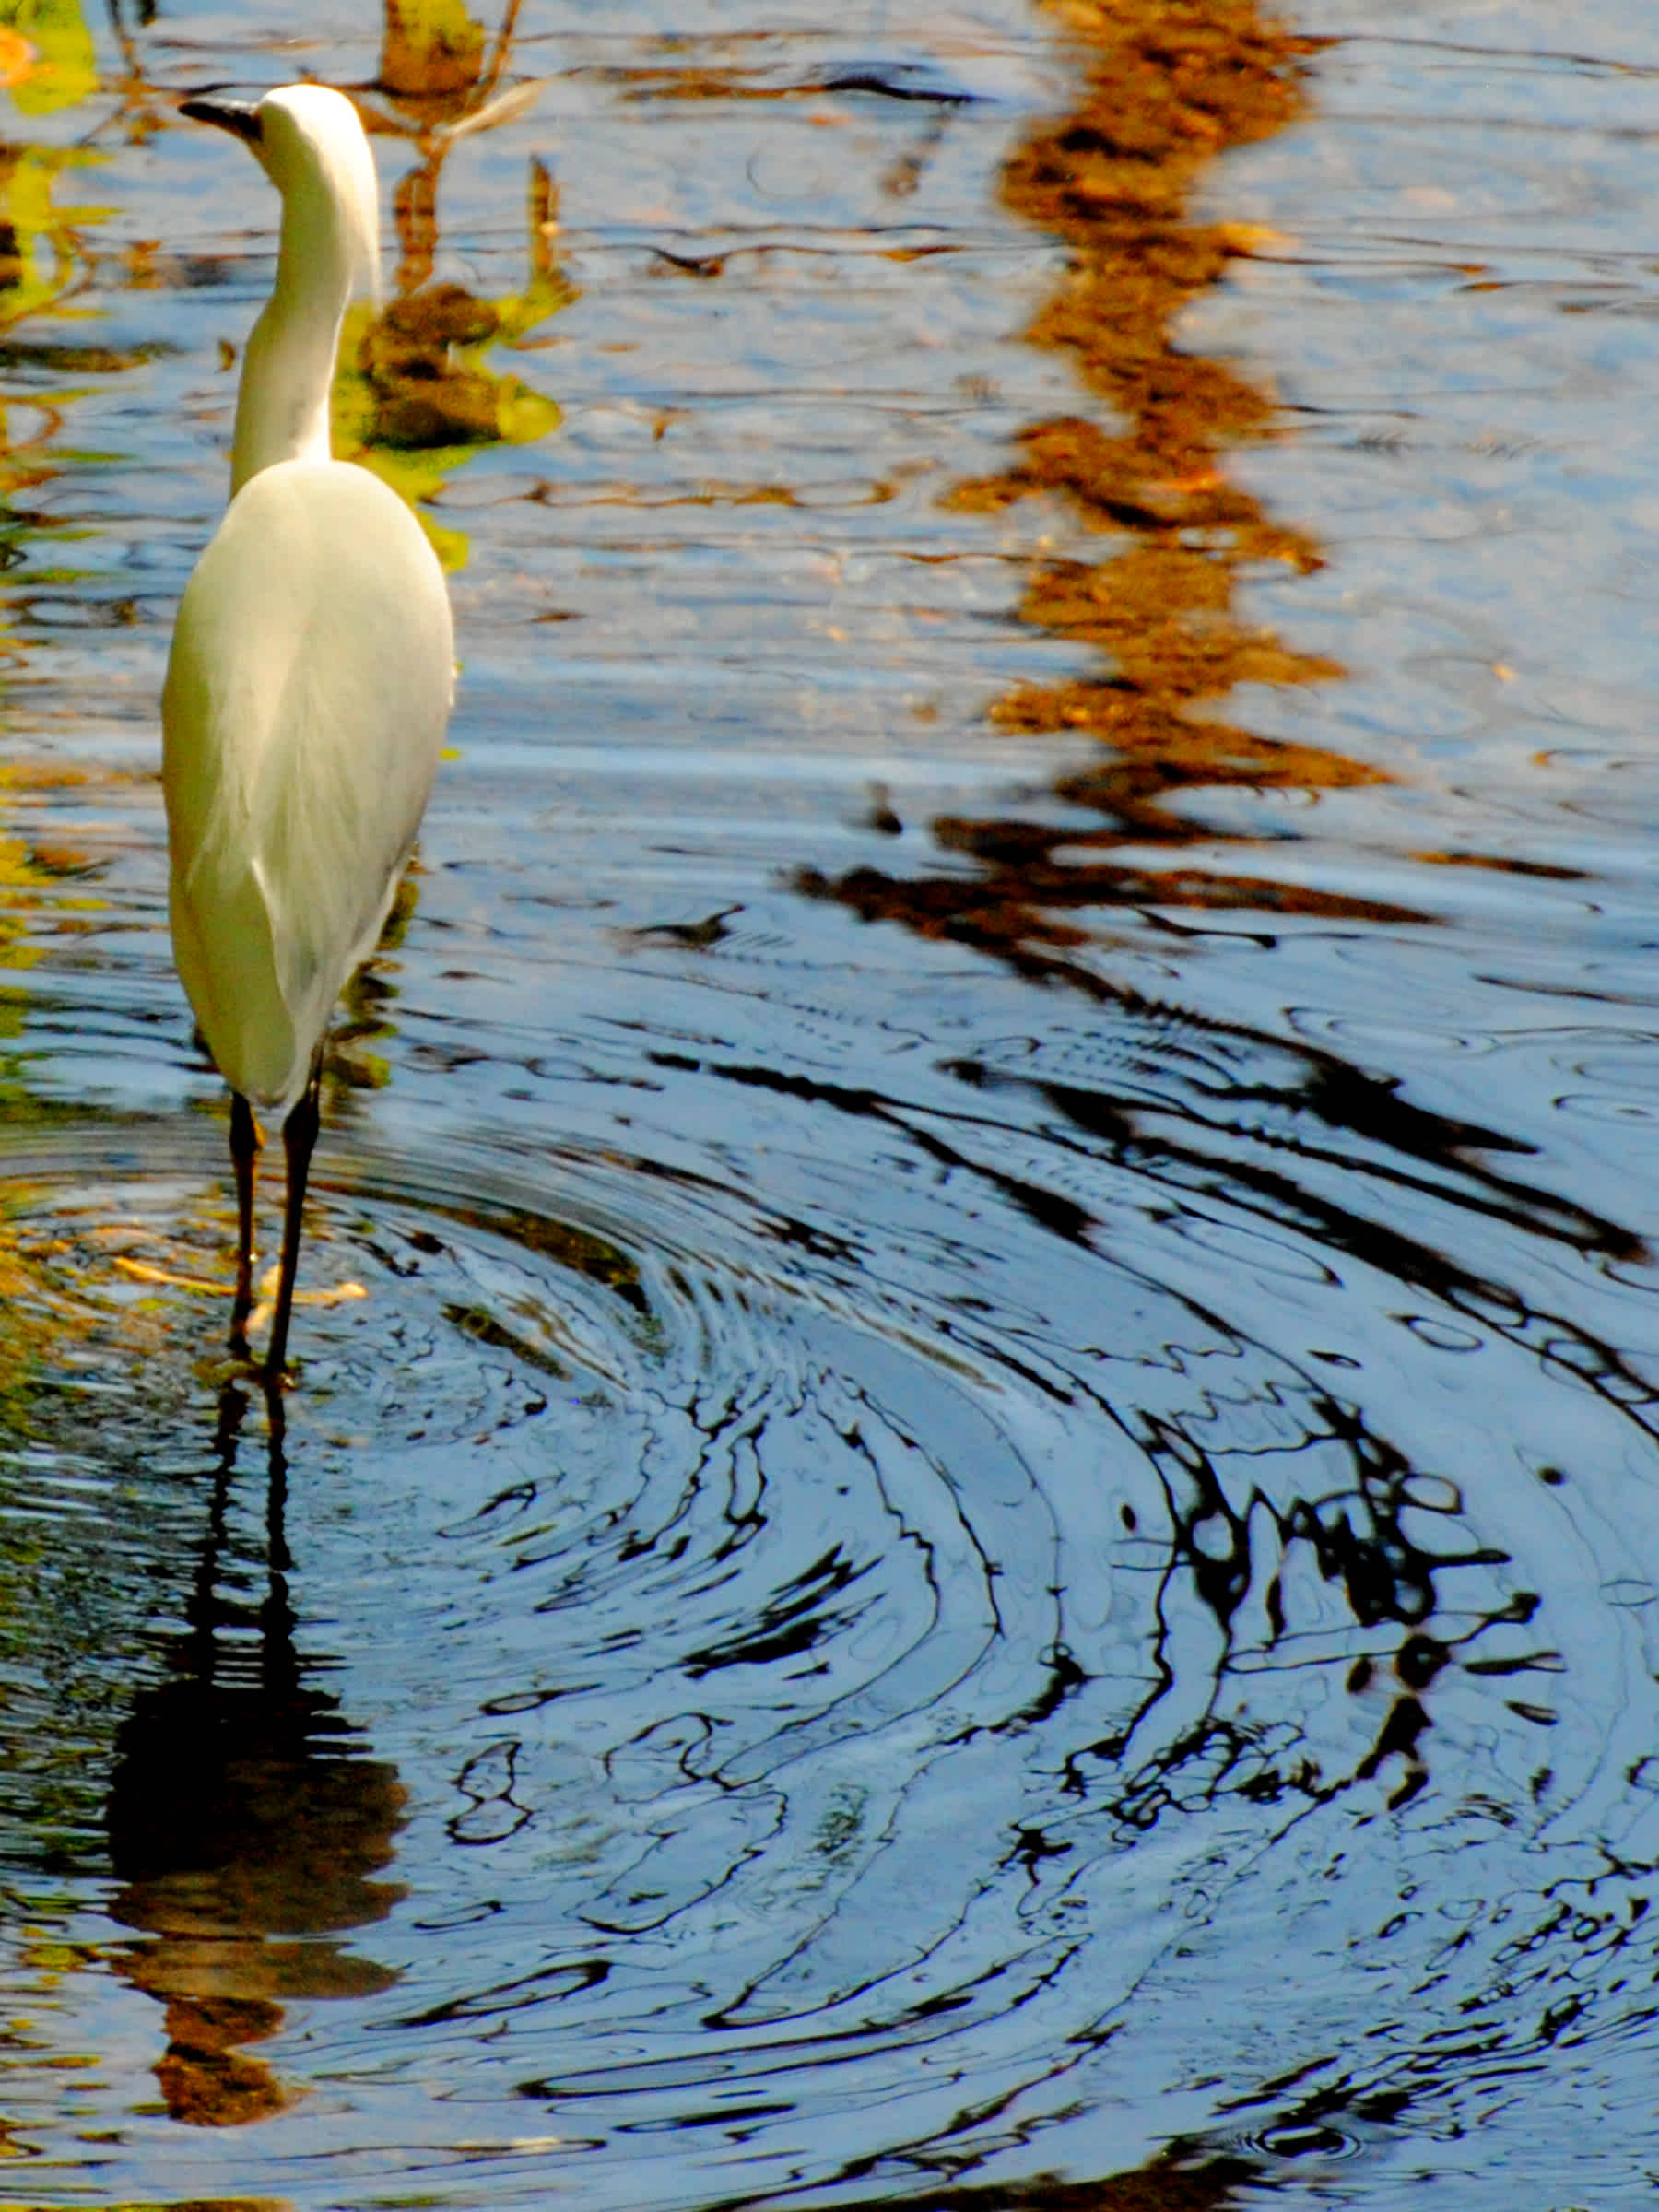 White bird with long legs standing in the water.